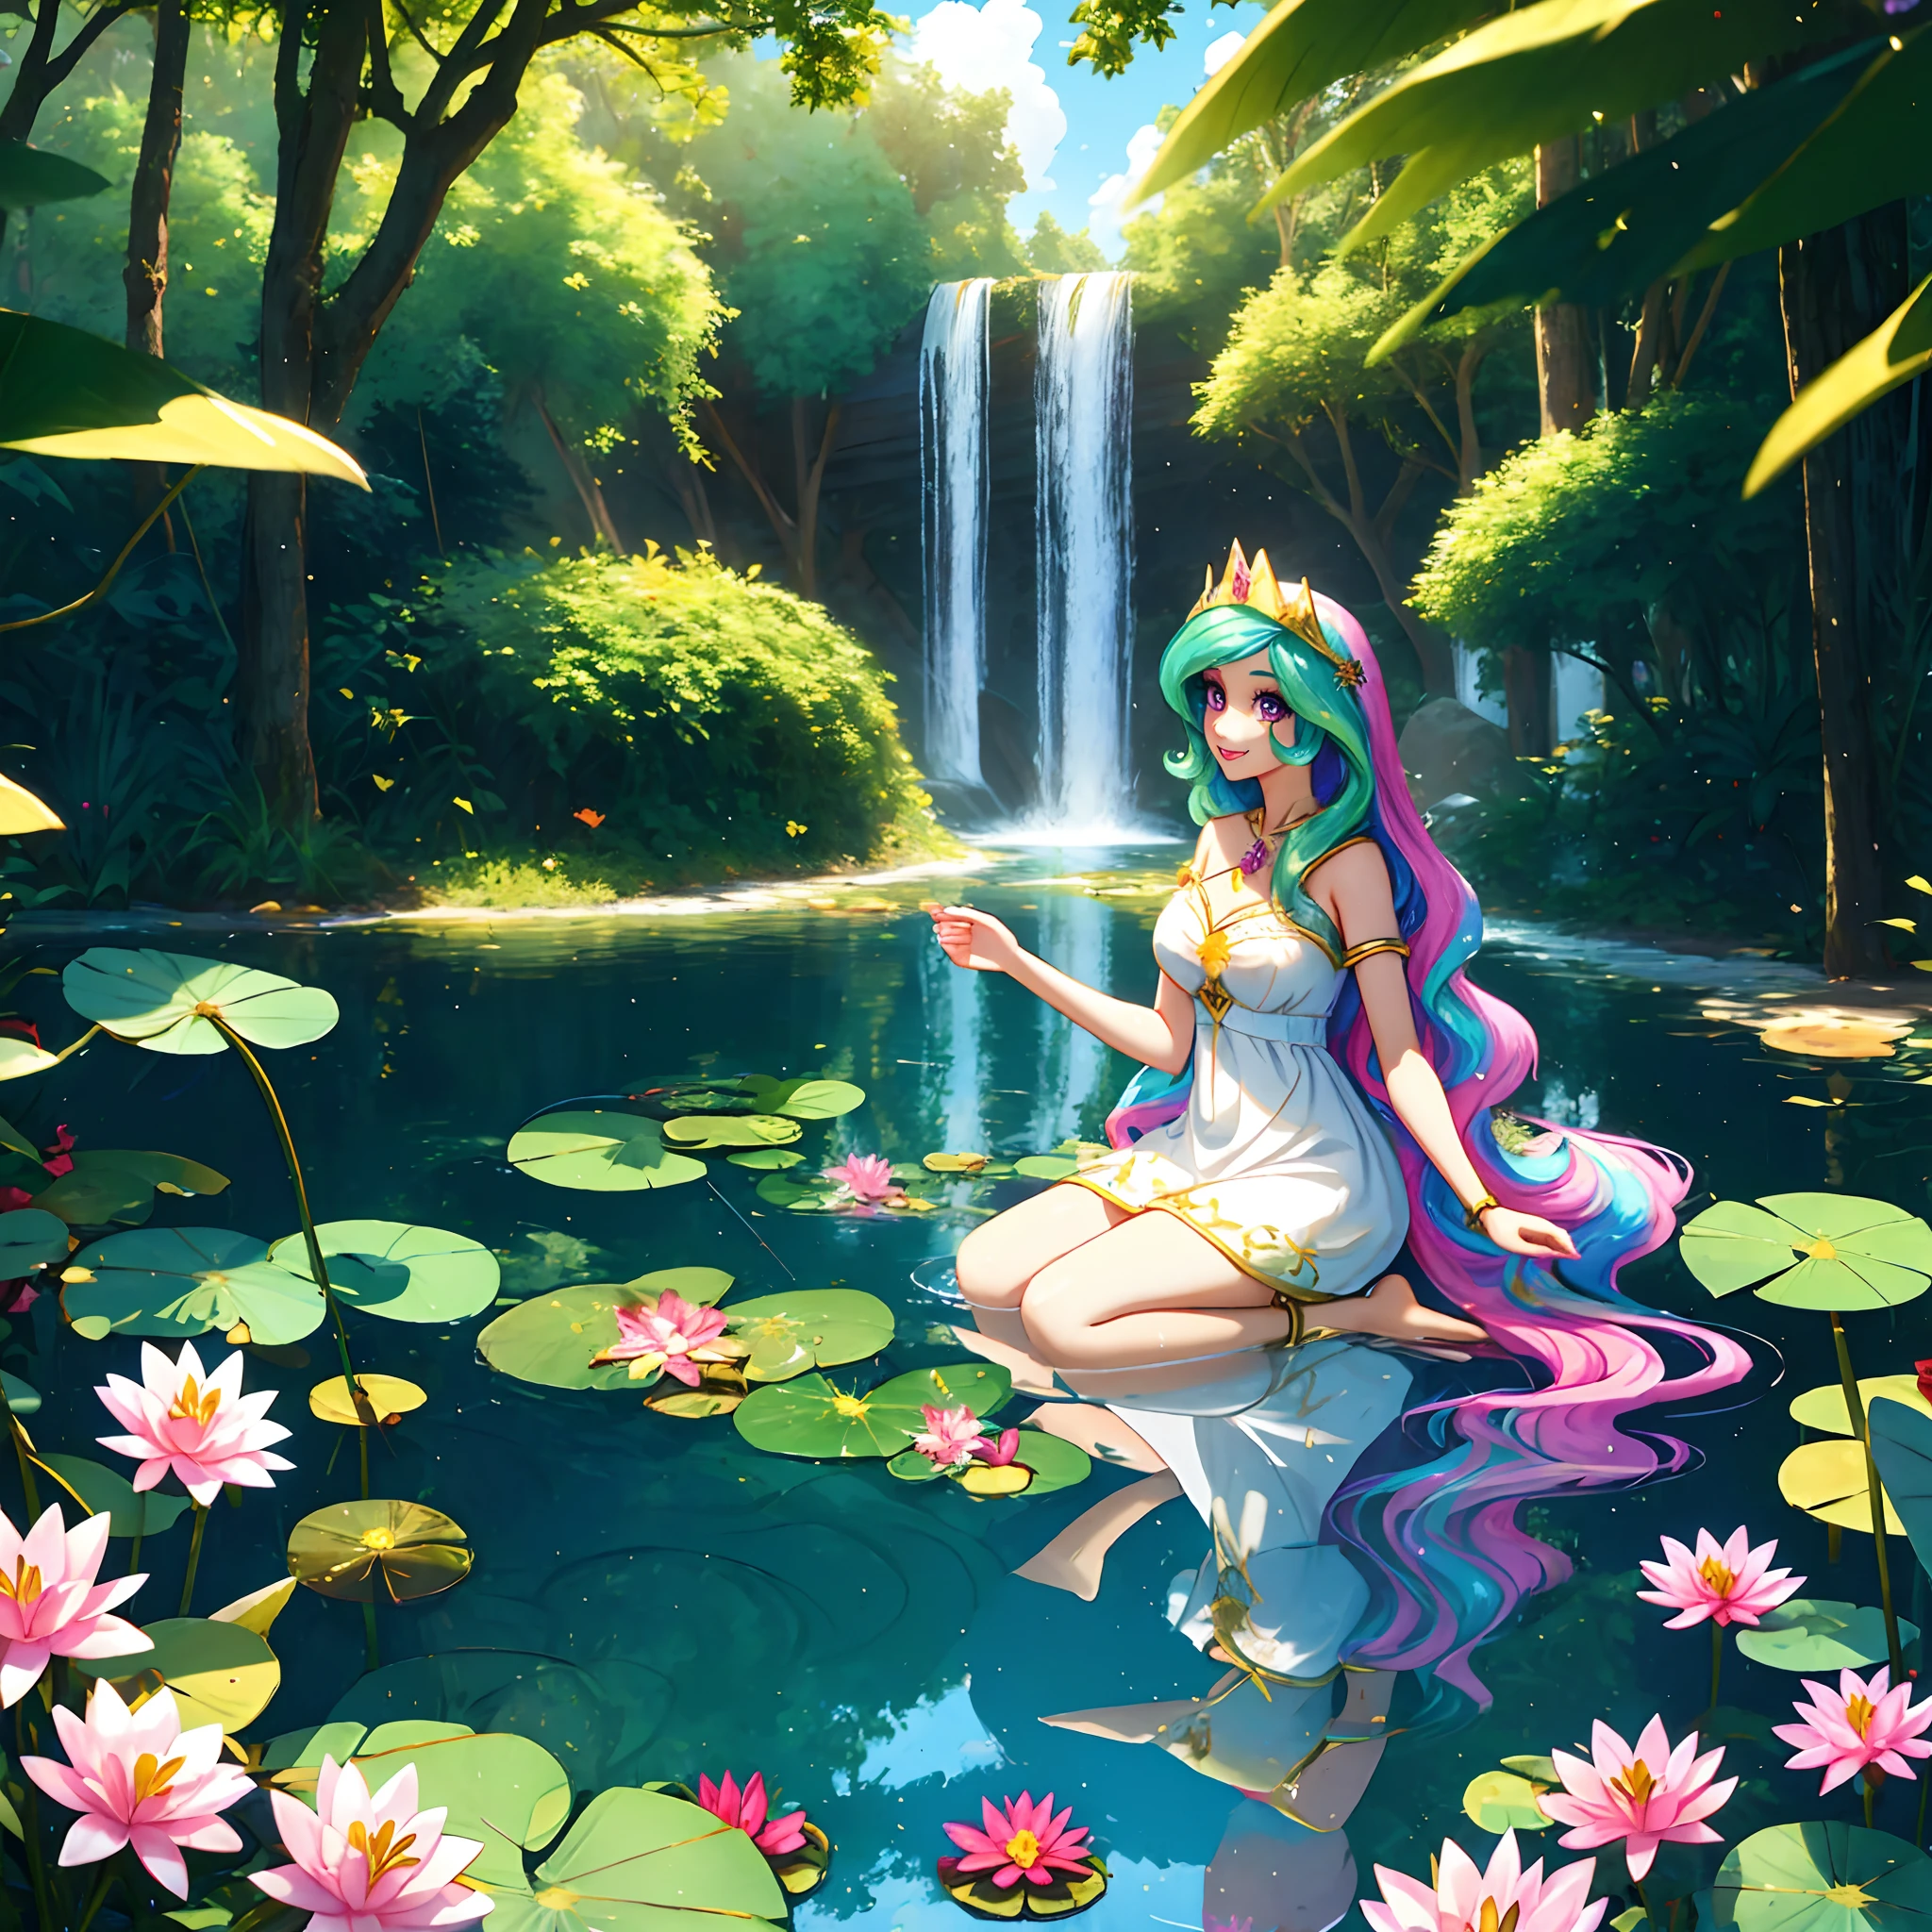 Celestia, celestia from my little pony, celestia in the form of a girl, long wavy hair, pink eyes, lush breast, greek columns, outside, beautiful majestic forest, vine leafs surrounding the columns, bush of flowers everywhere, wear a white goddess dress, knee high boot, white angelic wings, white pony ears, clear sky, bright sunny day, water fall, river, water reflection, lily pads, heavenly forest, long beautiful greek dress